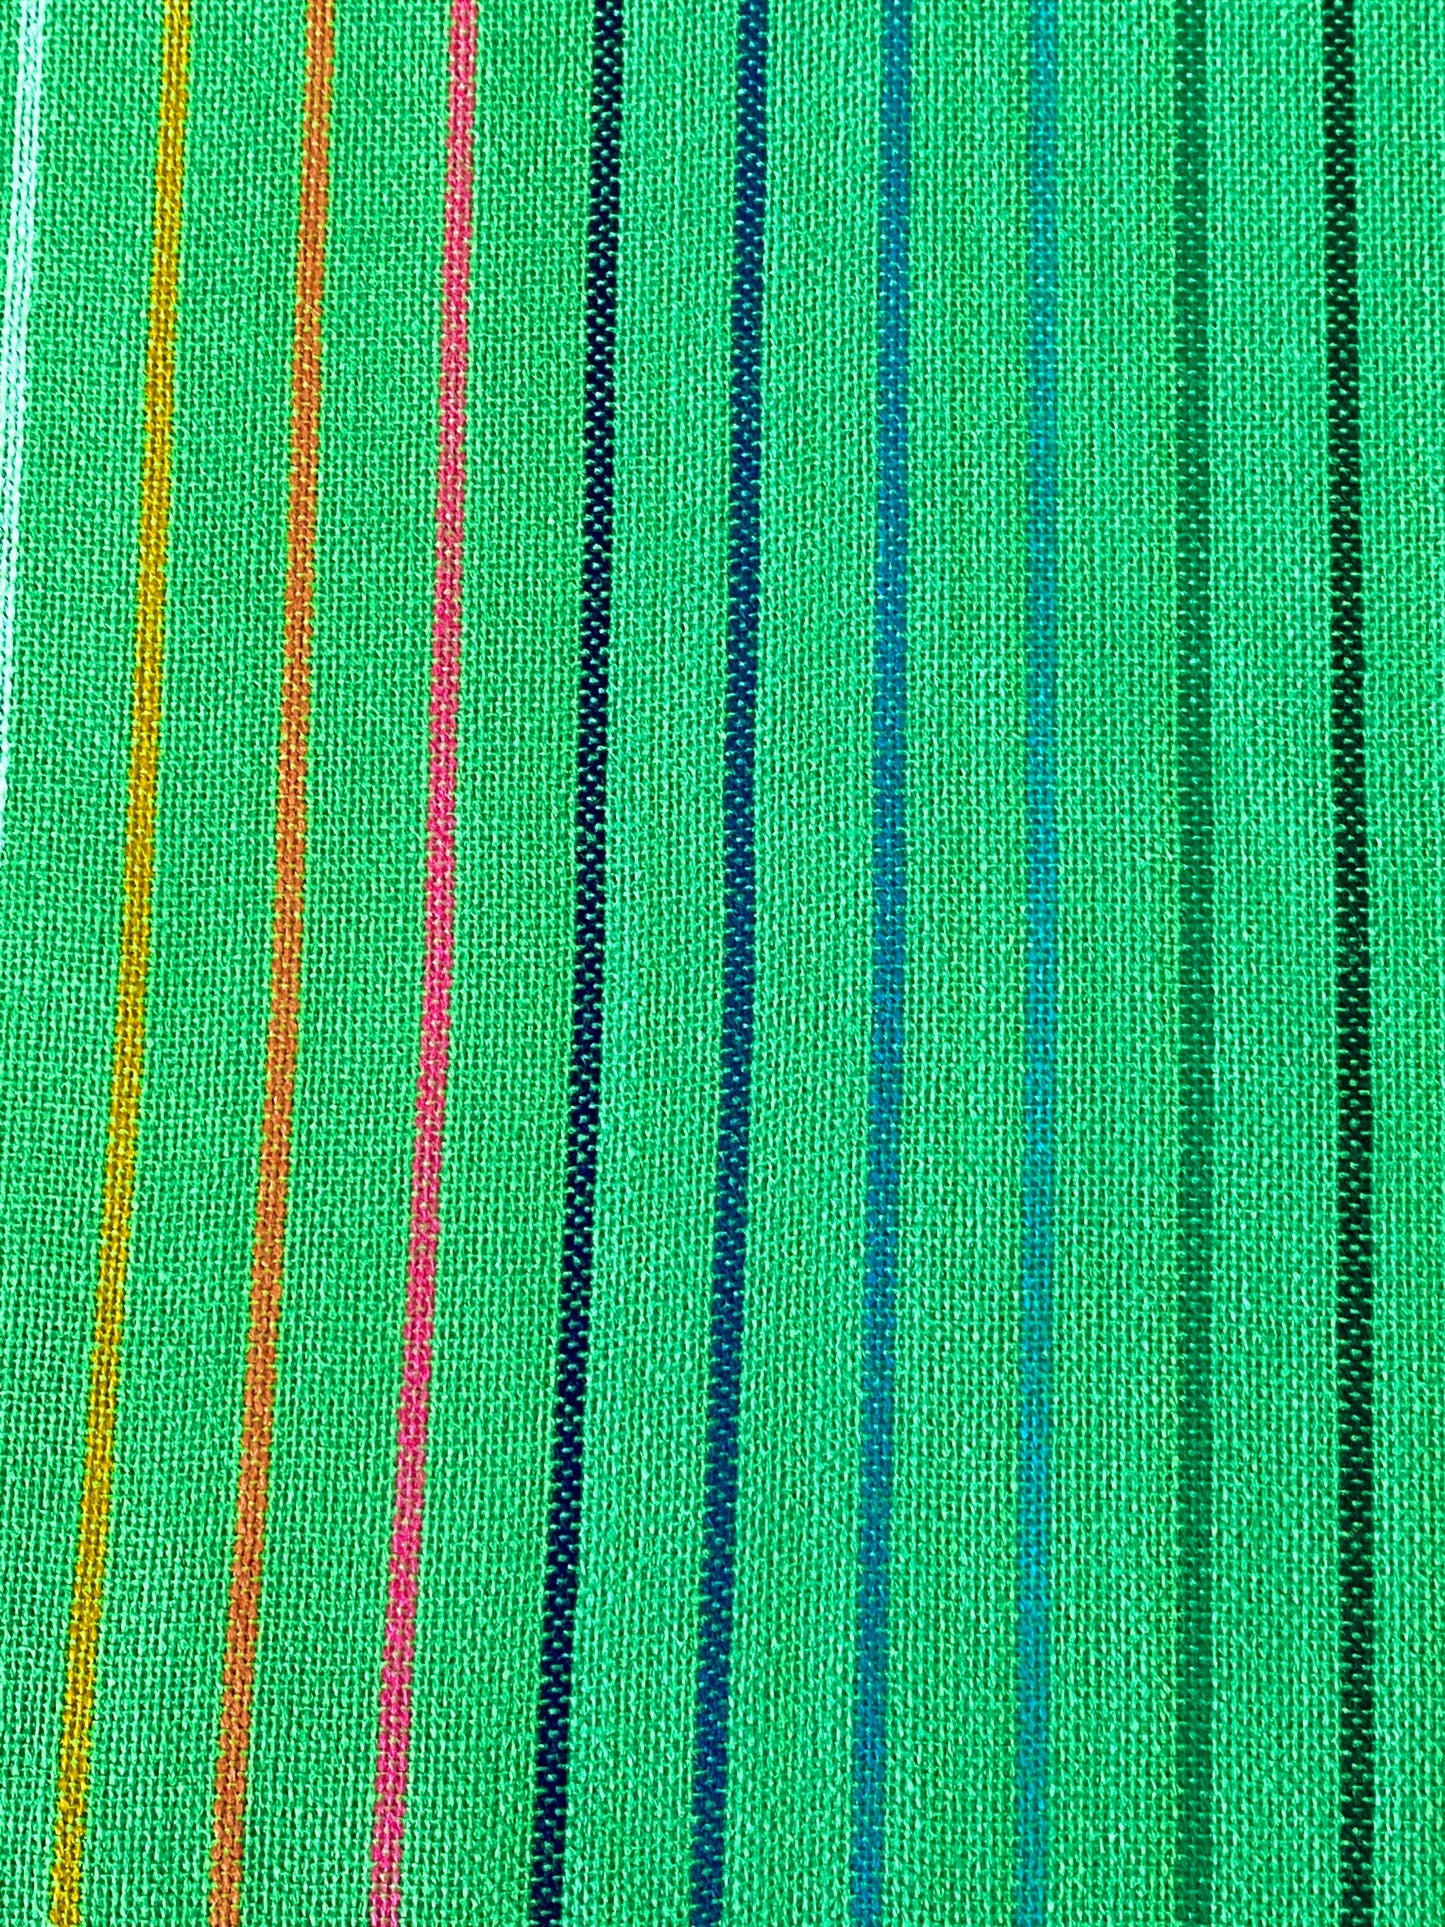 Fiesta decorations Table Runner- Lime green striped